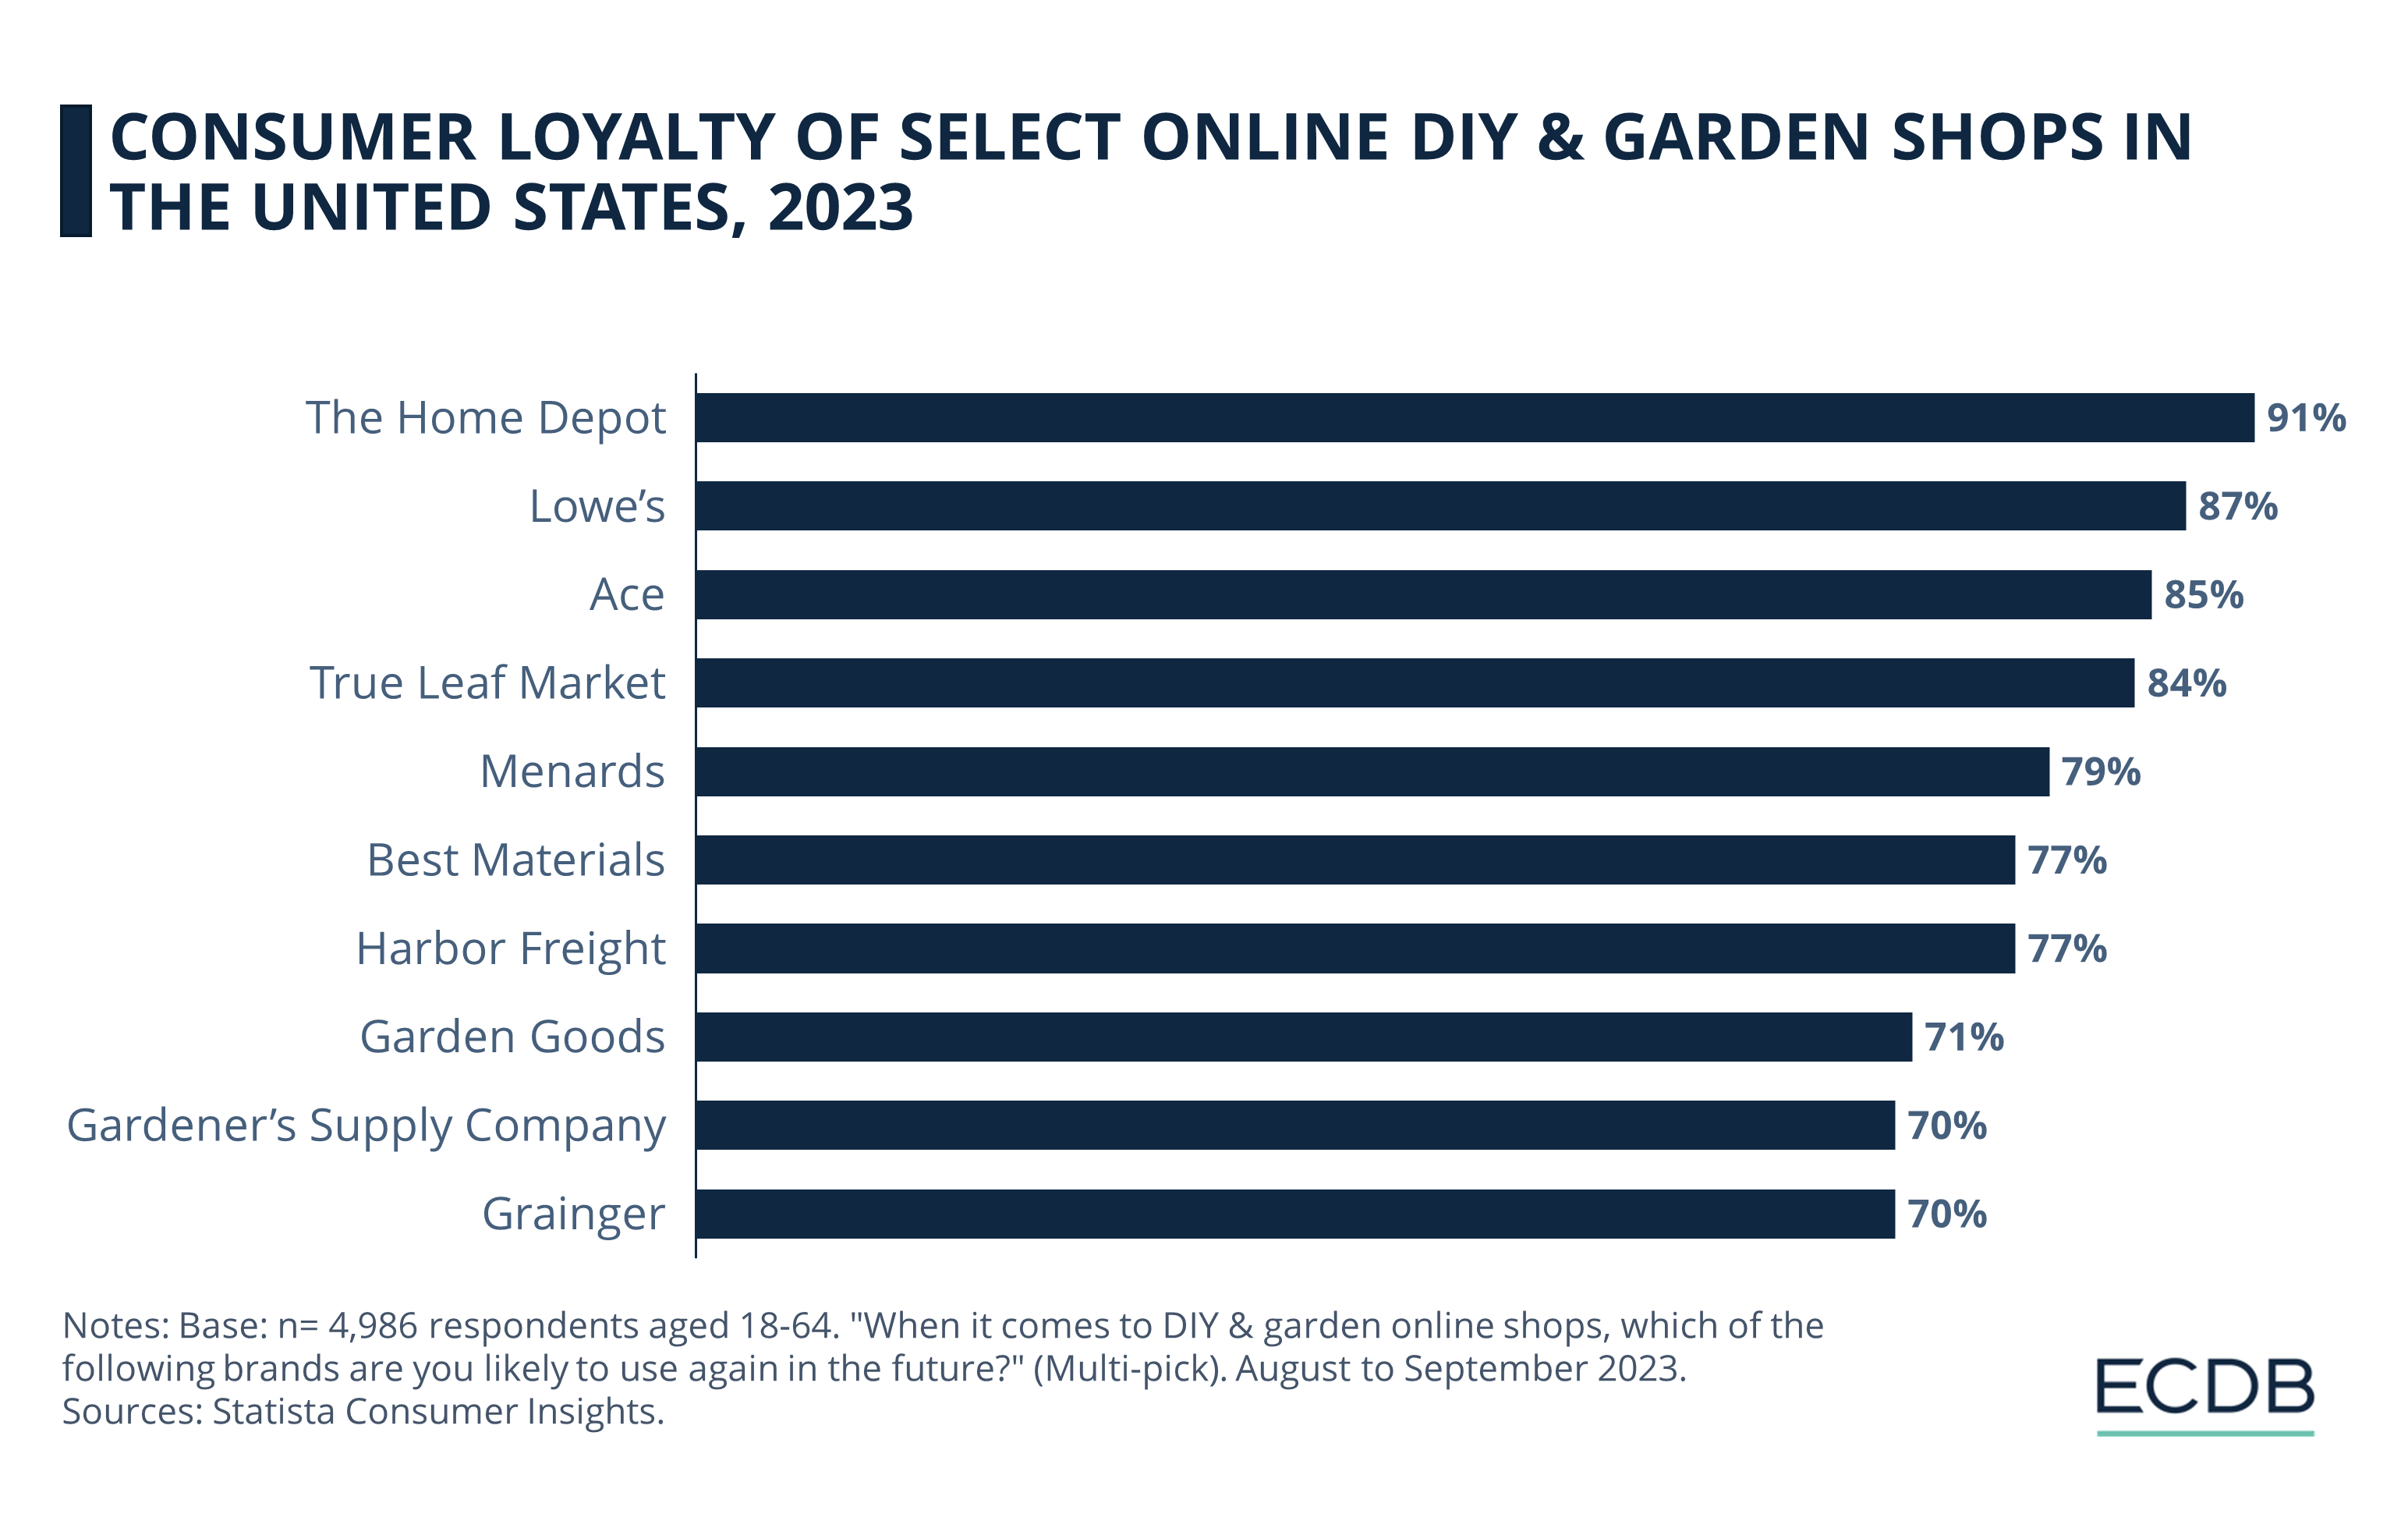 Consumer Loyalty of Select Online DIY & Garden Shops in the United States, 2023